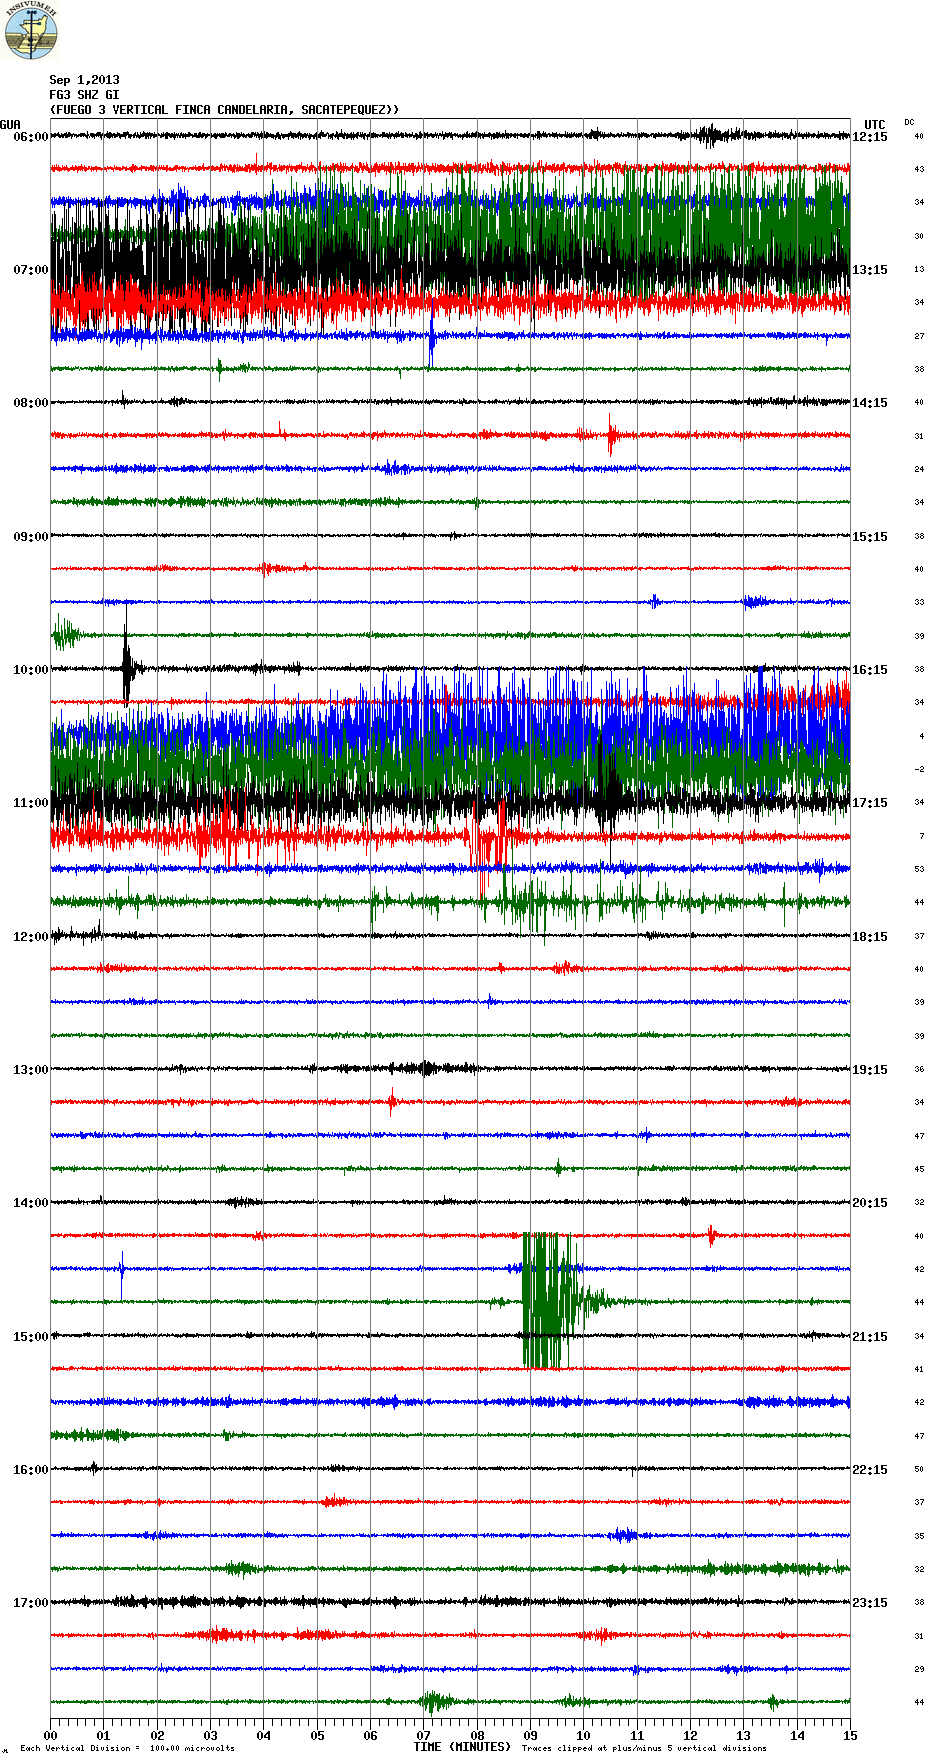 Seismic signal from Fuego last night showing tremor pulses (FG3 station, INSIVUMEH)